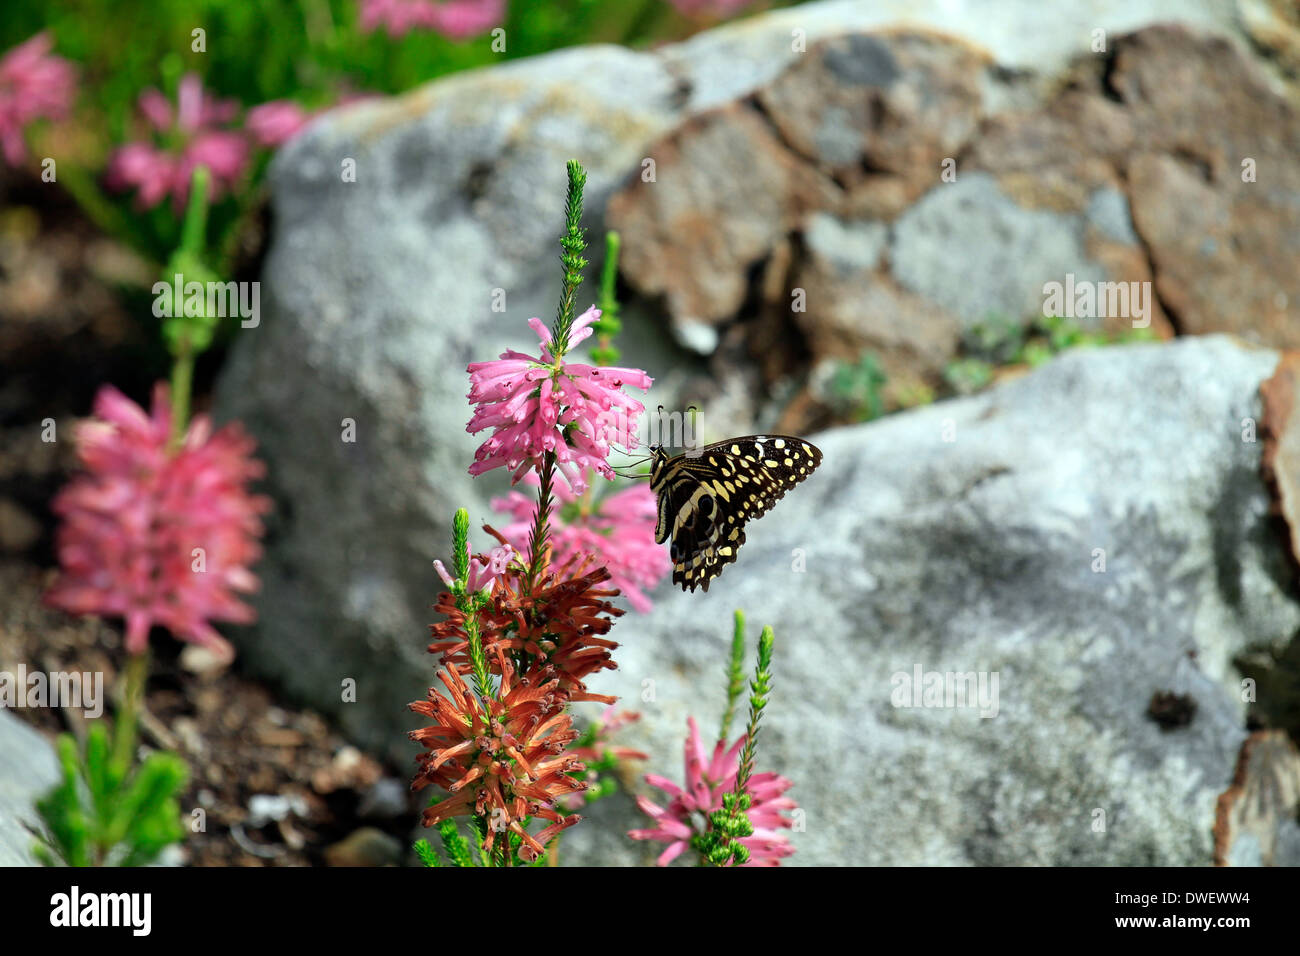 Erica verticillata  with'Citrus Swallowtail'butterfly on it  in Kirstenbosch Botanical Gardens, Cape Town, South Africa. Stock Photo